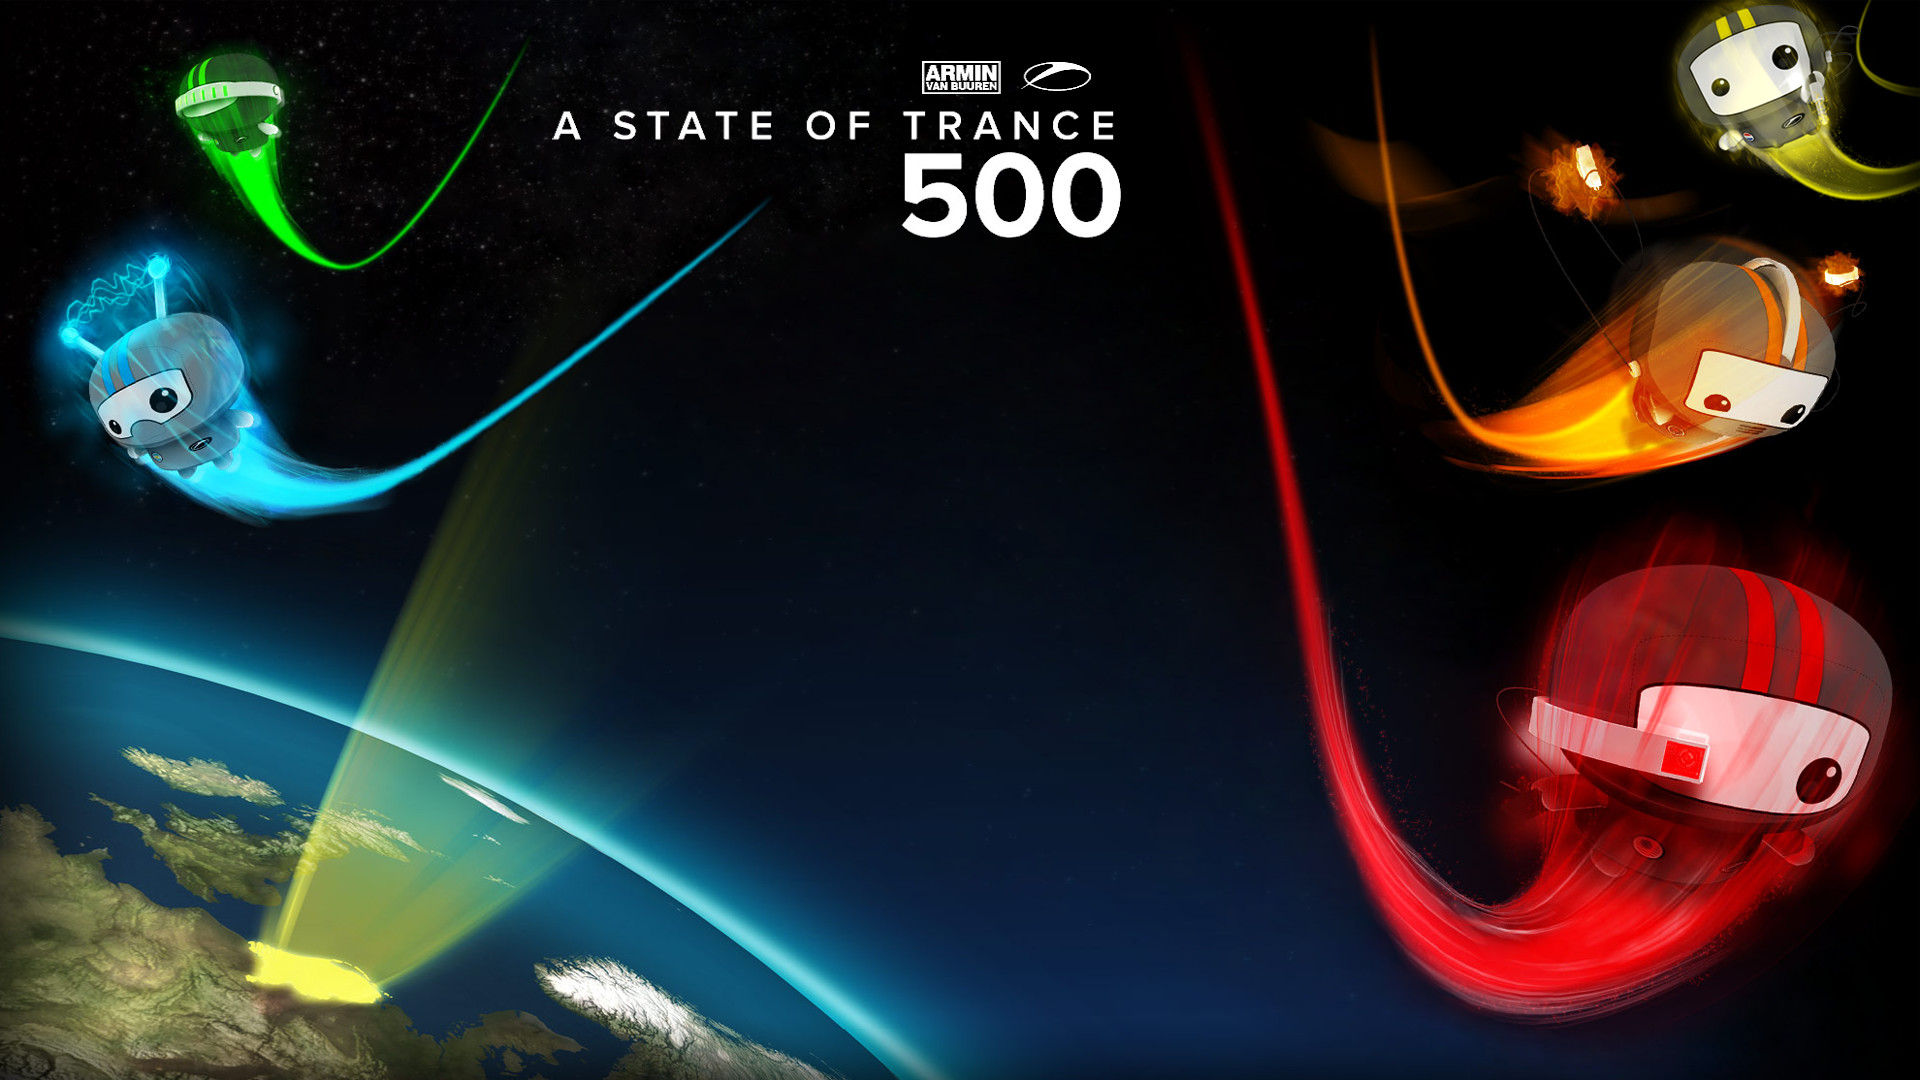 1920x1080 ... A State of Trance 500 by xmynox